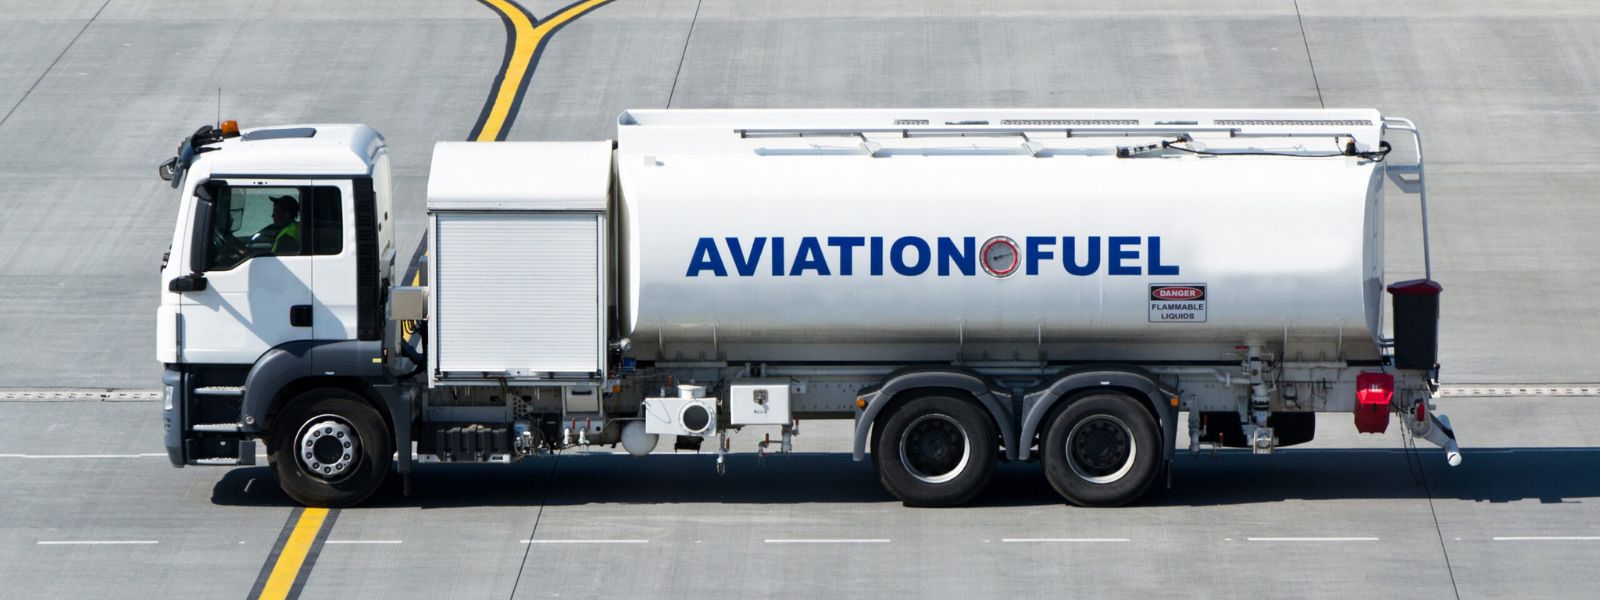 Cabinet decides on the supply of Aviation Fuel